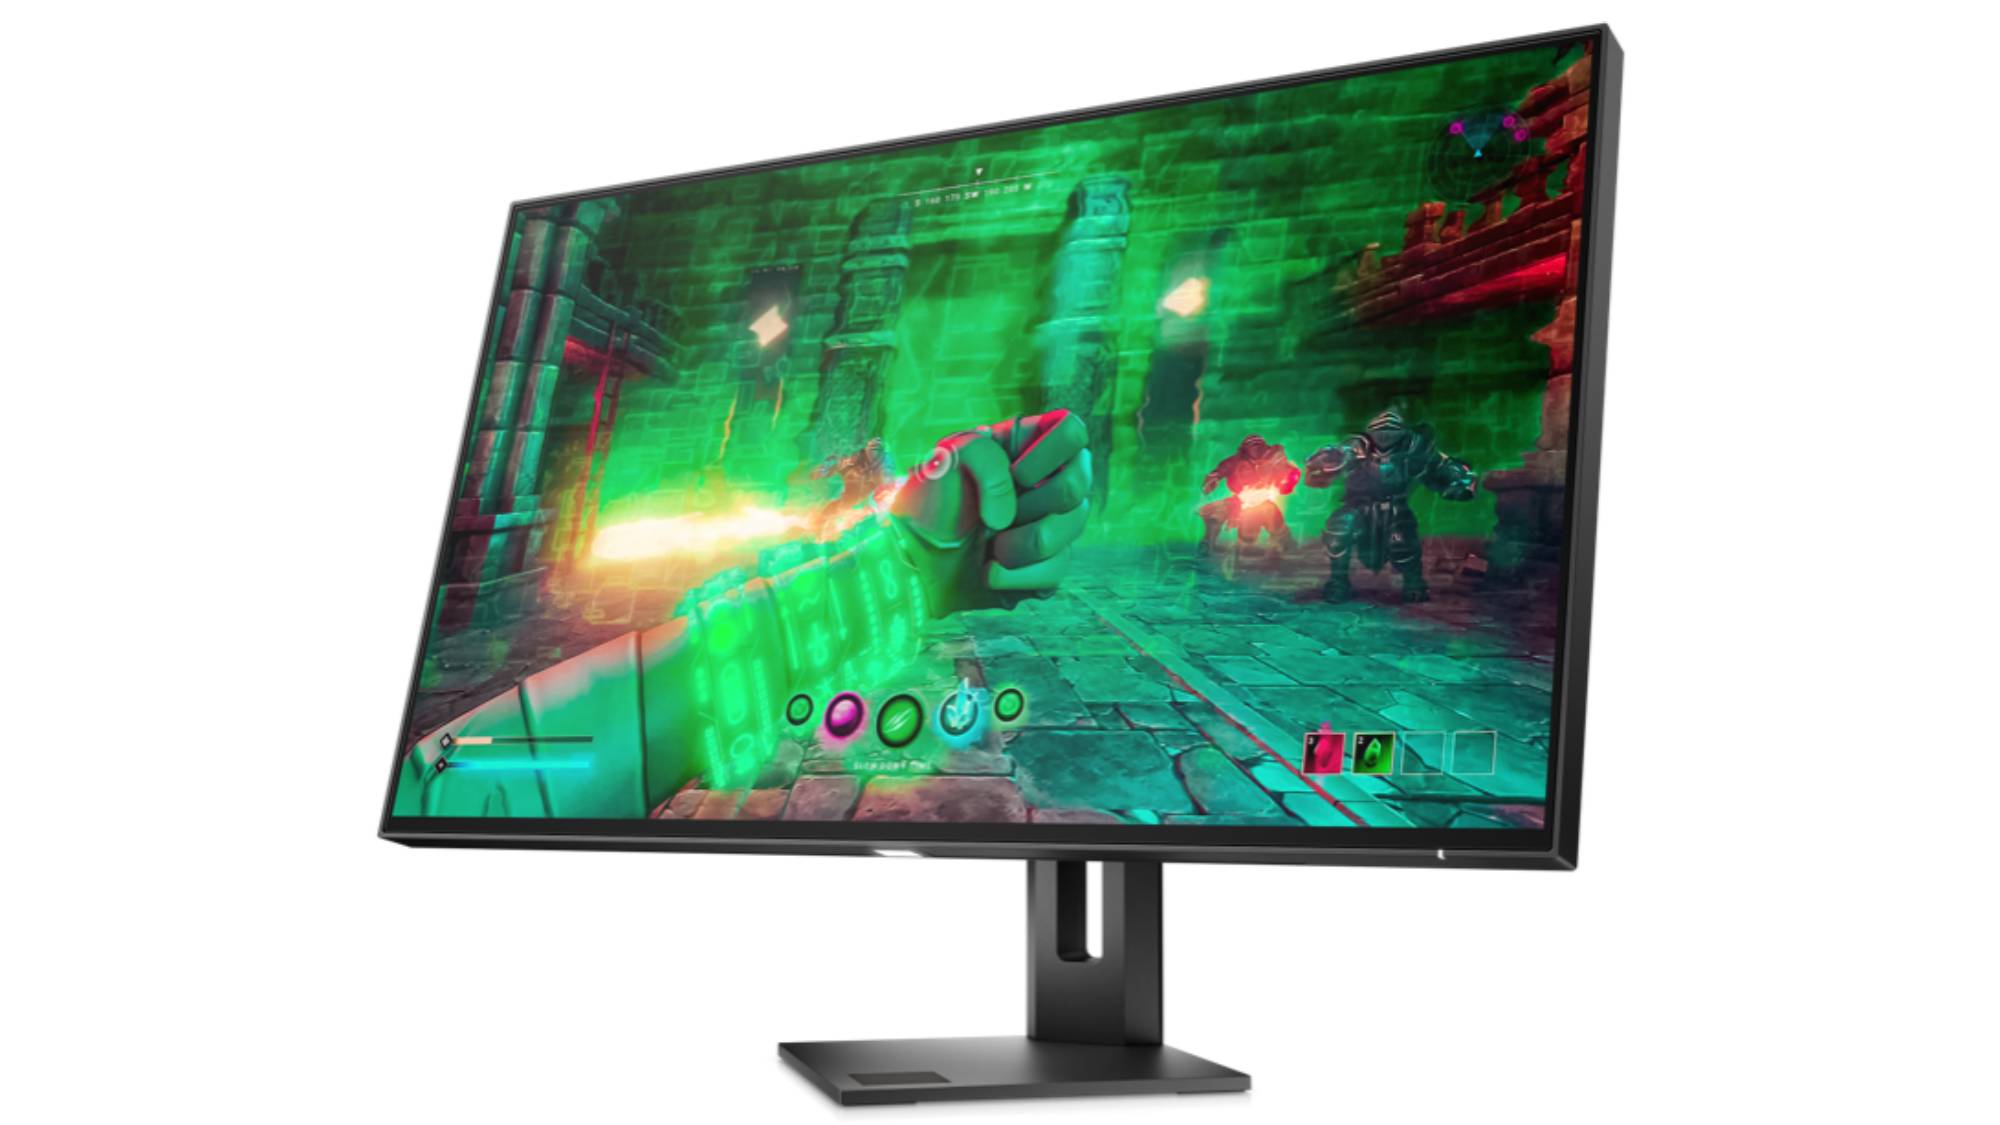 Omen 27U monitor showing a fantasy game being played